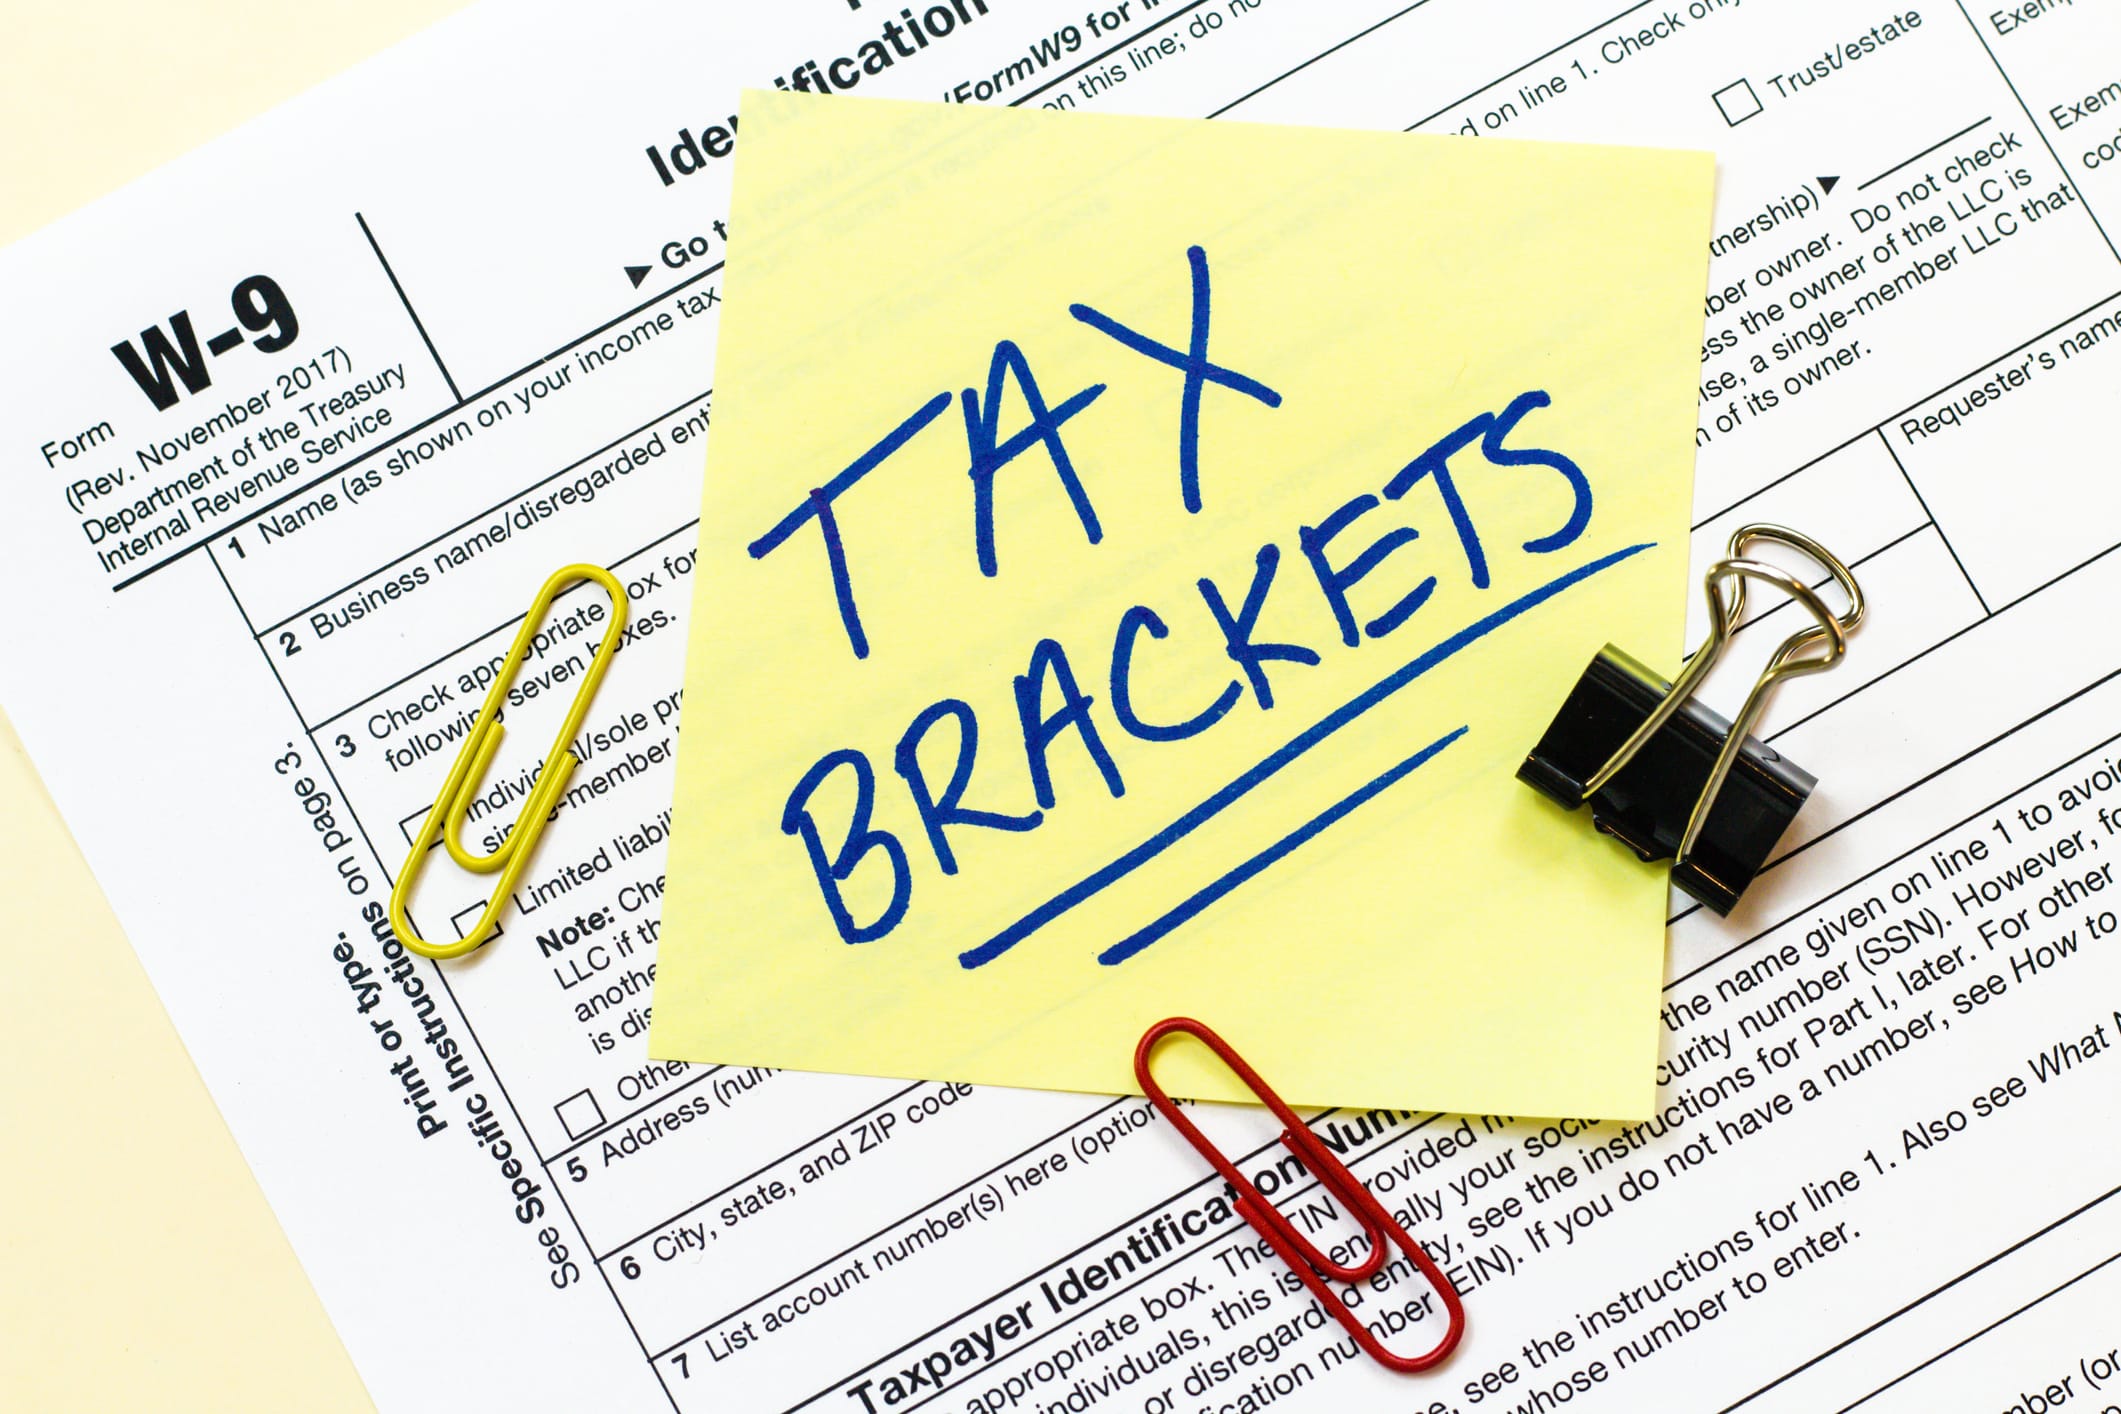 Tax Brackets written on a yellow sticky note on top of tax forms.